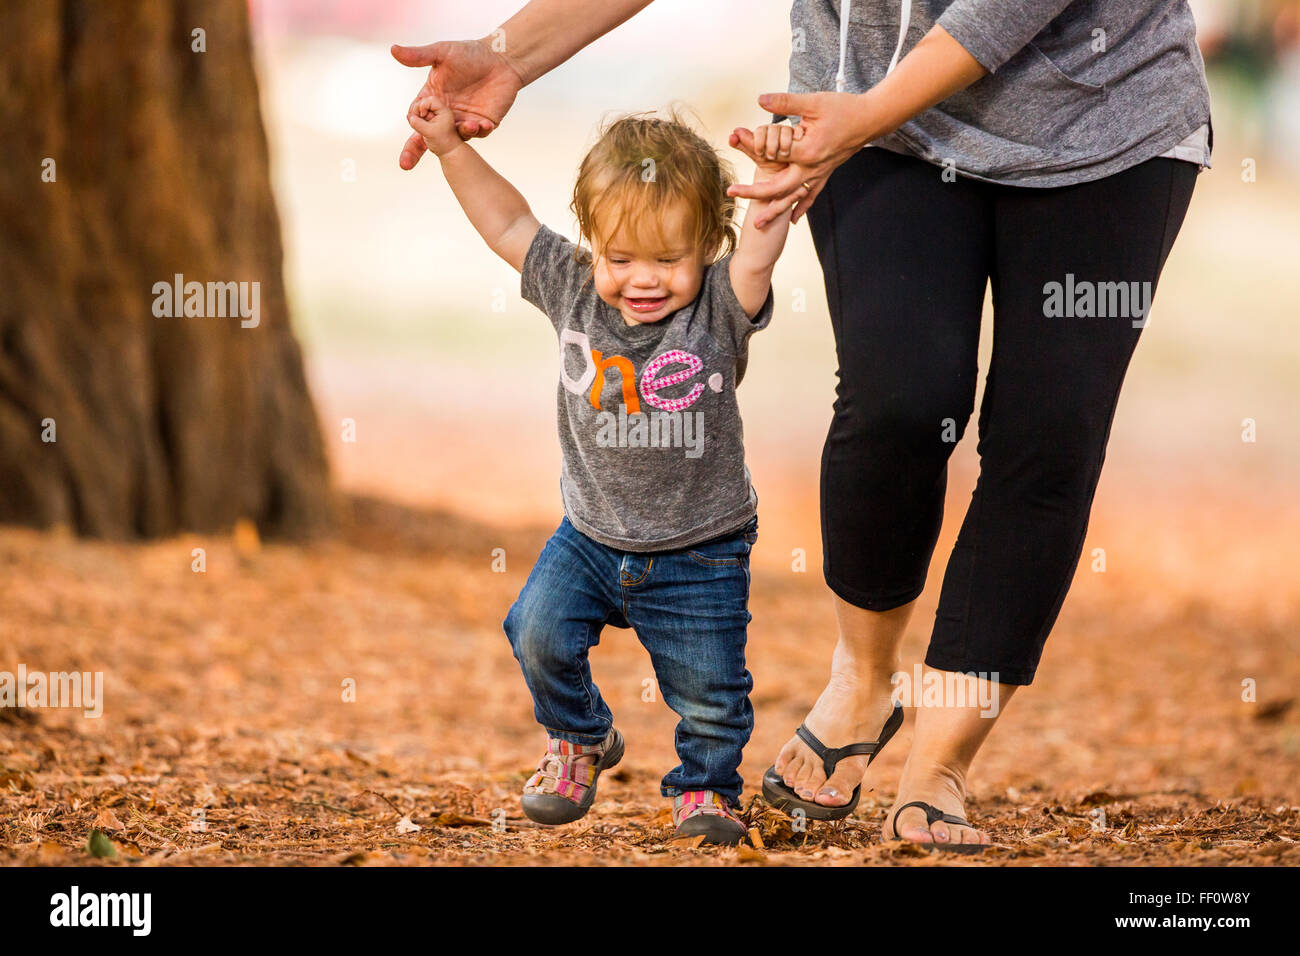 Caucasian mother and daughter walking outdoors Stock Photo